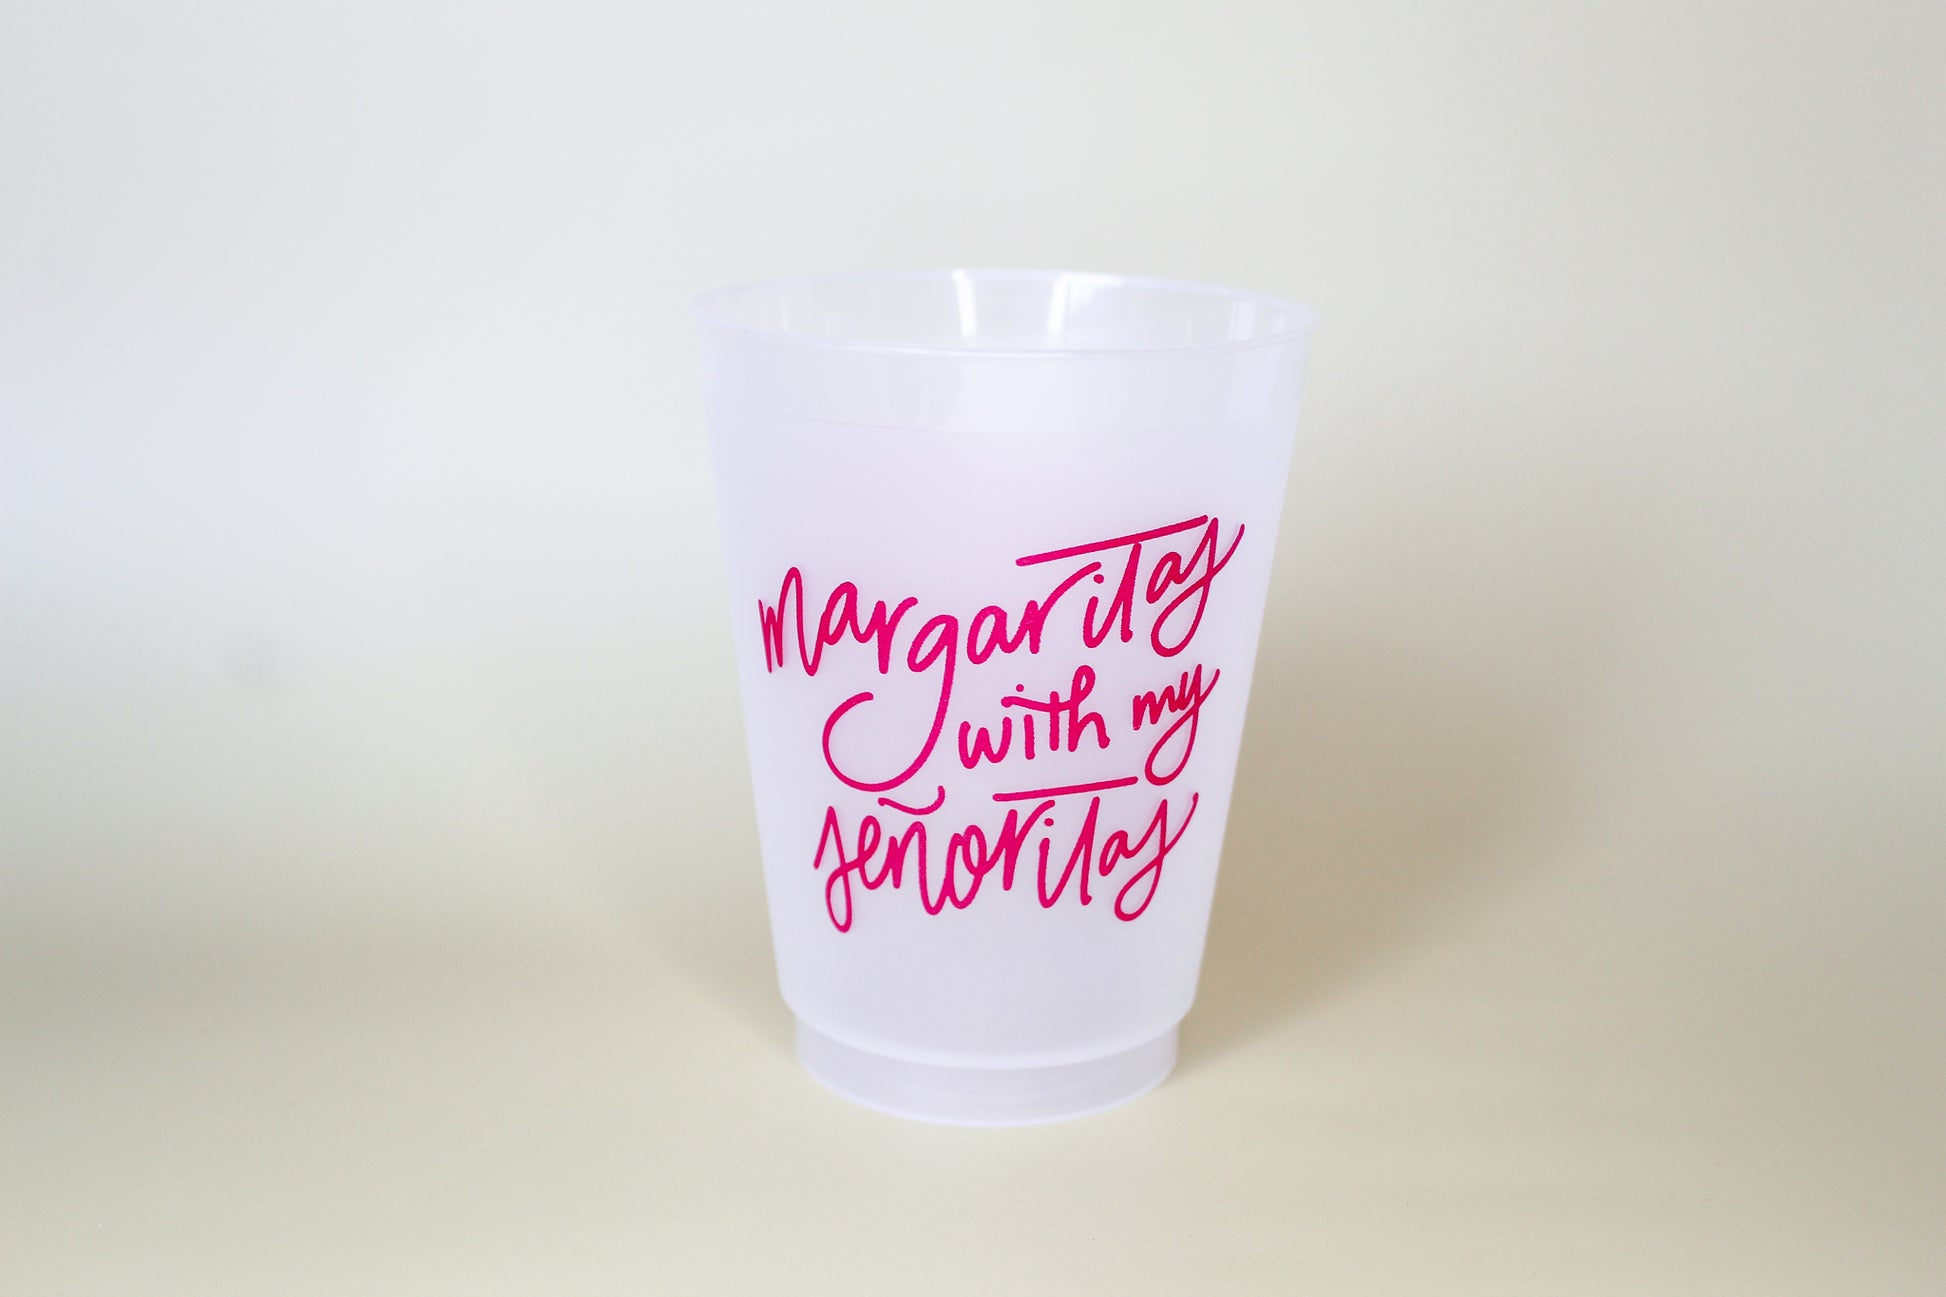 Mamacita Needs A Margarita Tumbler Insulated Cup for Cold Drinks  Personalized Gift for Mom or Friend Perfect for Summer 